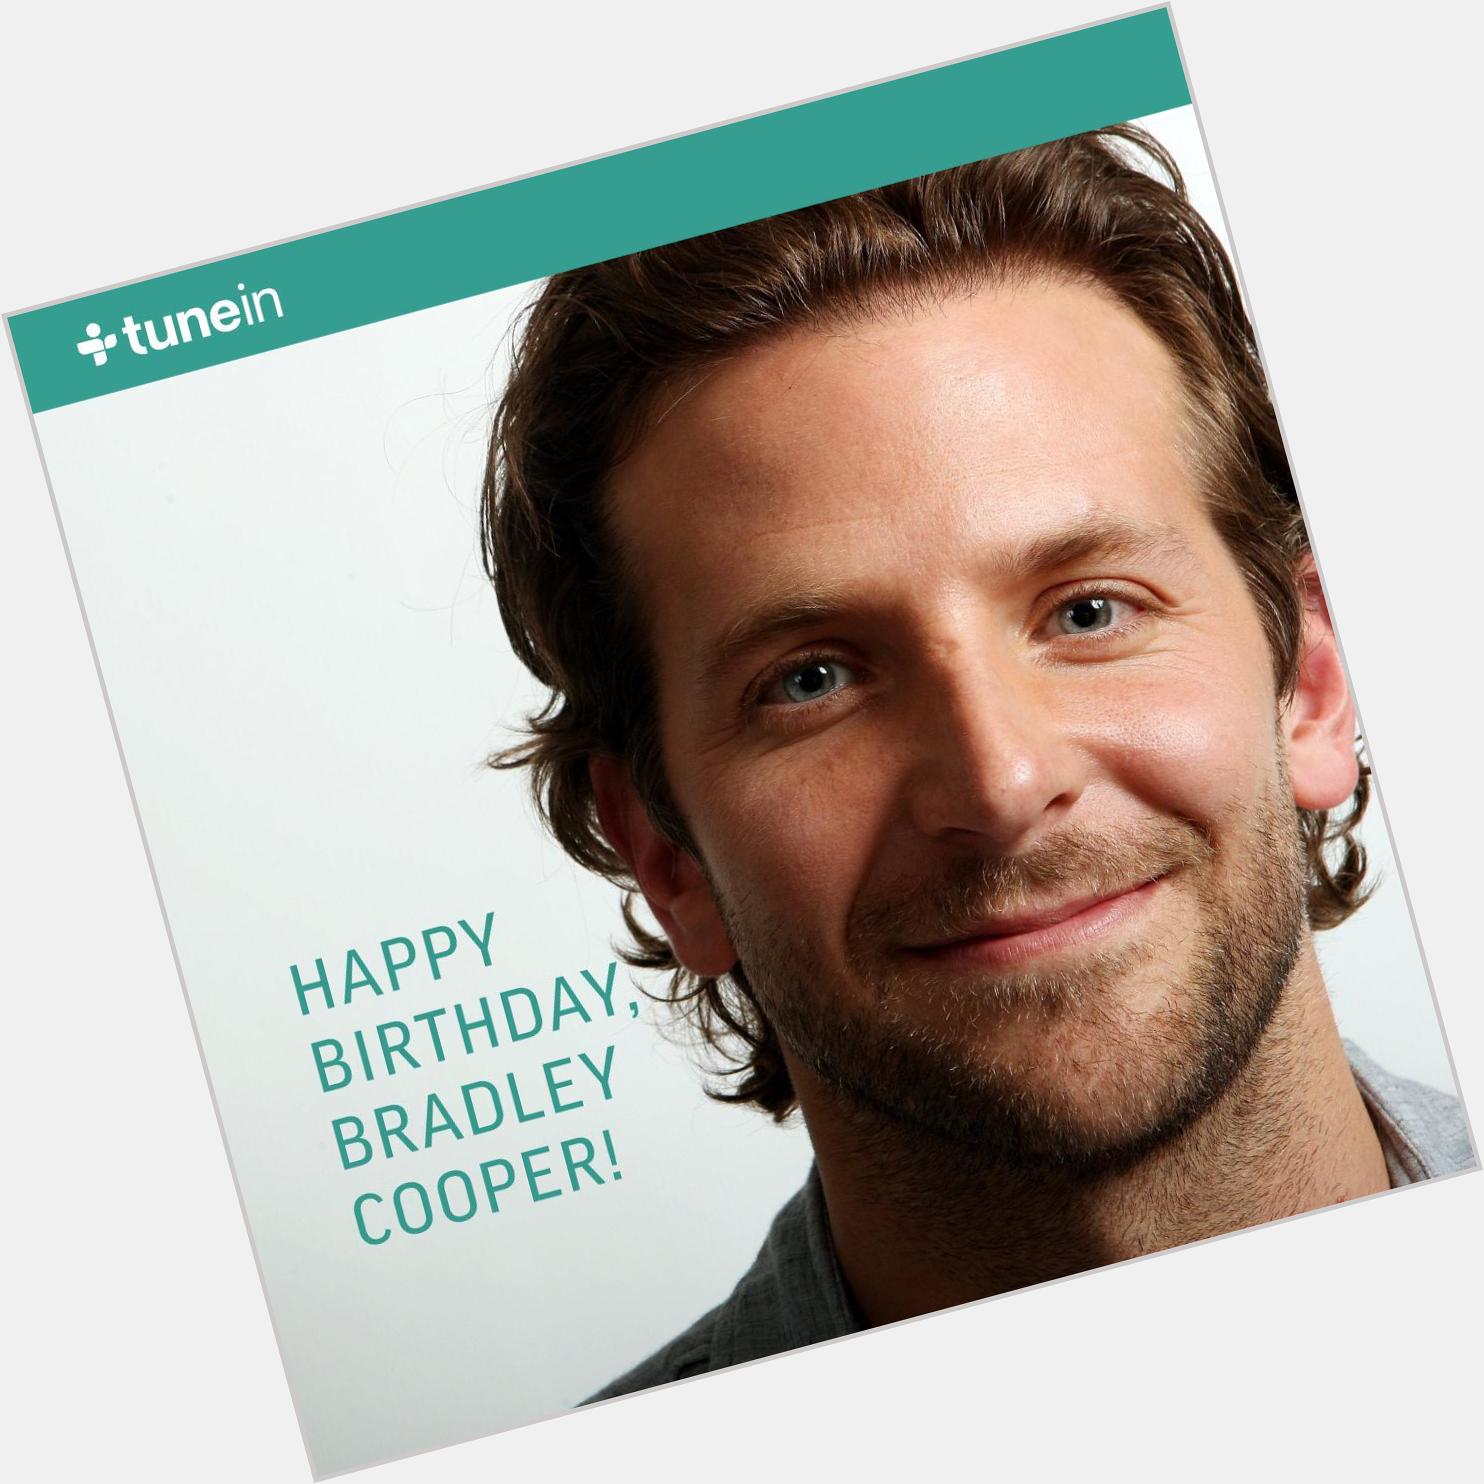 Happy 40th birthday to celebrated actor, Bradley Cooper! 

Hear his interview:  